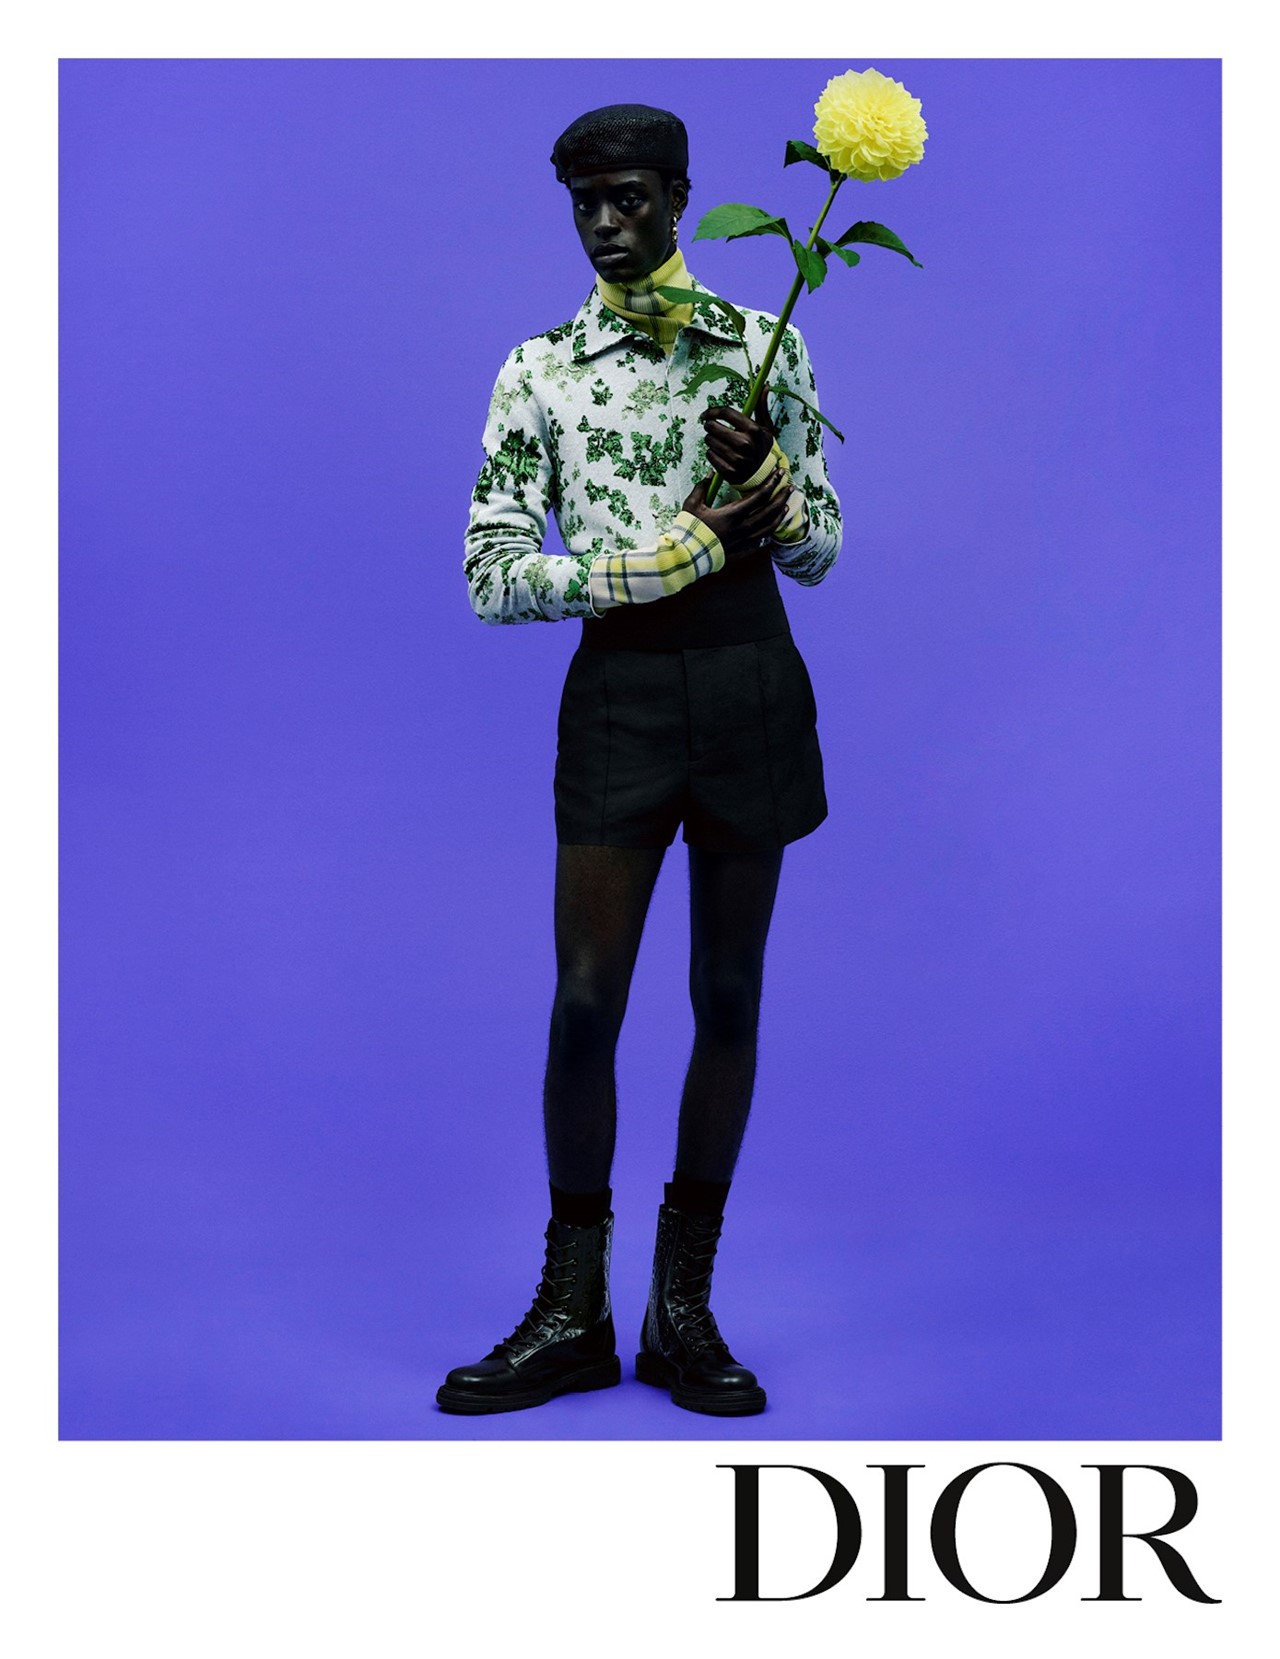 Dior Says It With Flowers in Verdant Men's Spring Campaign